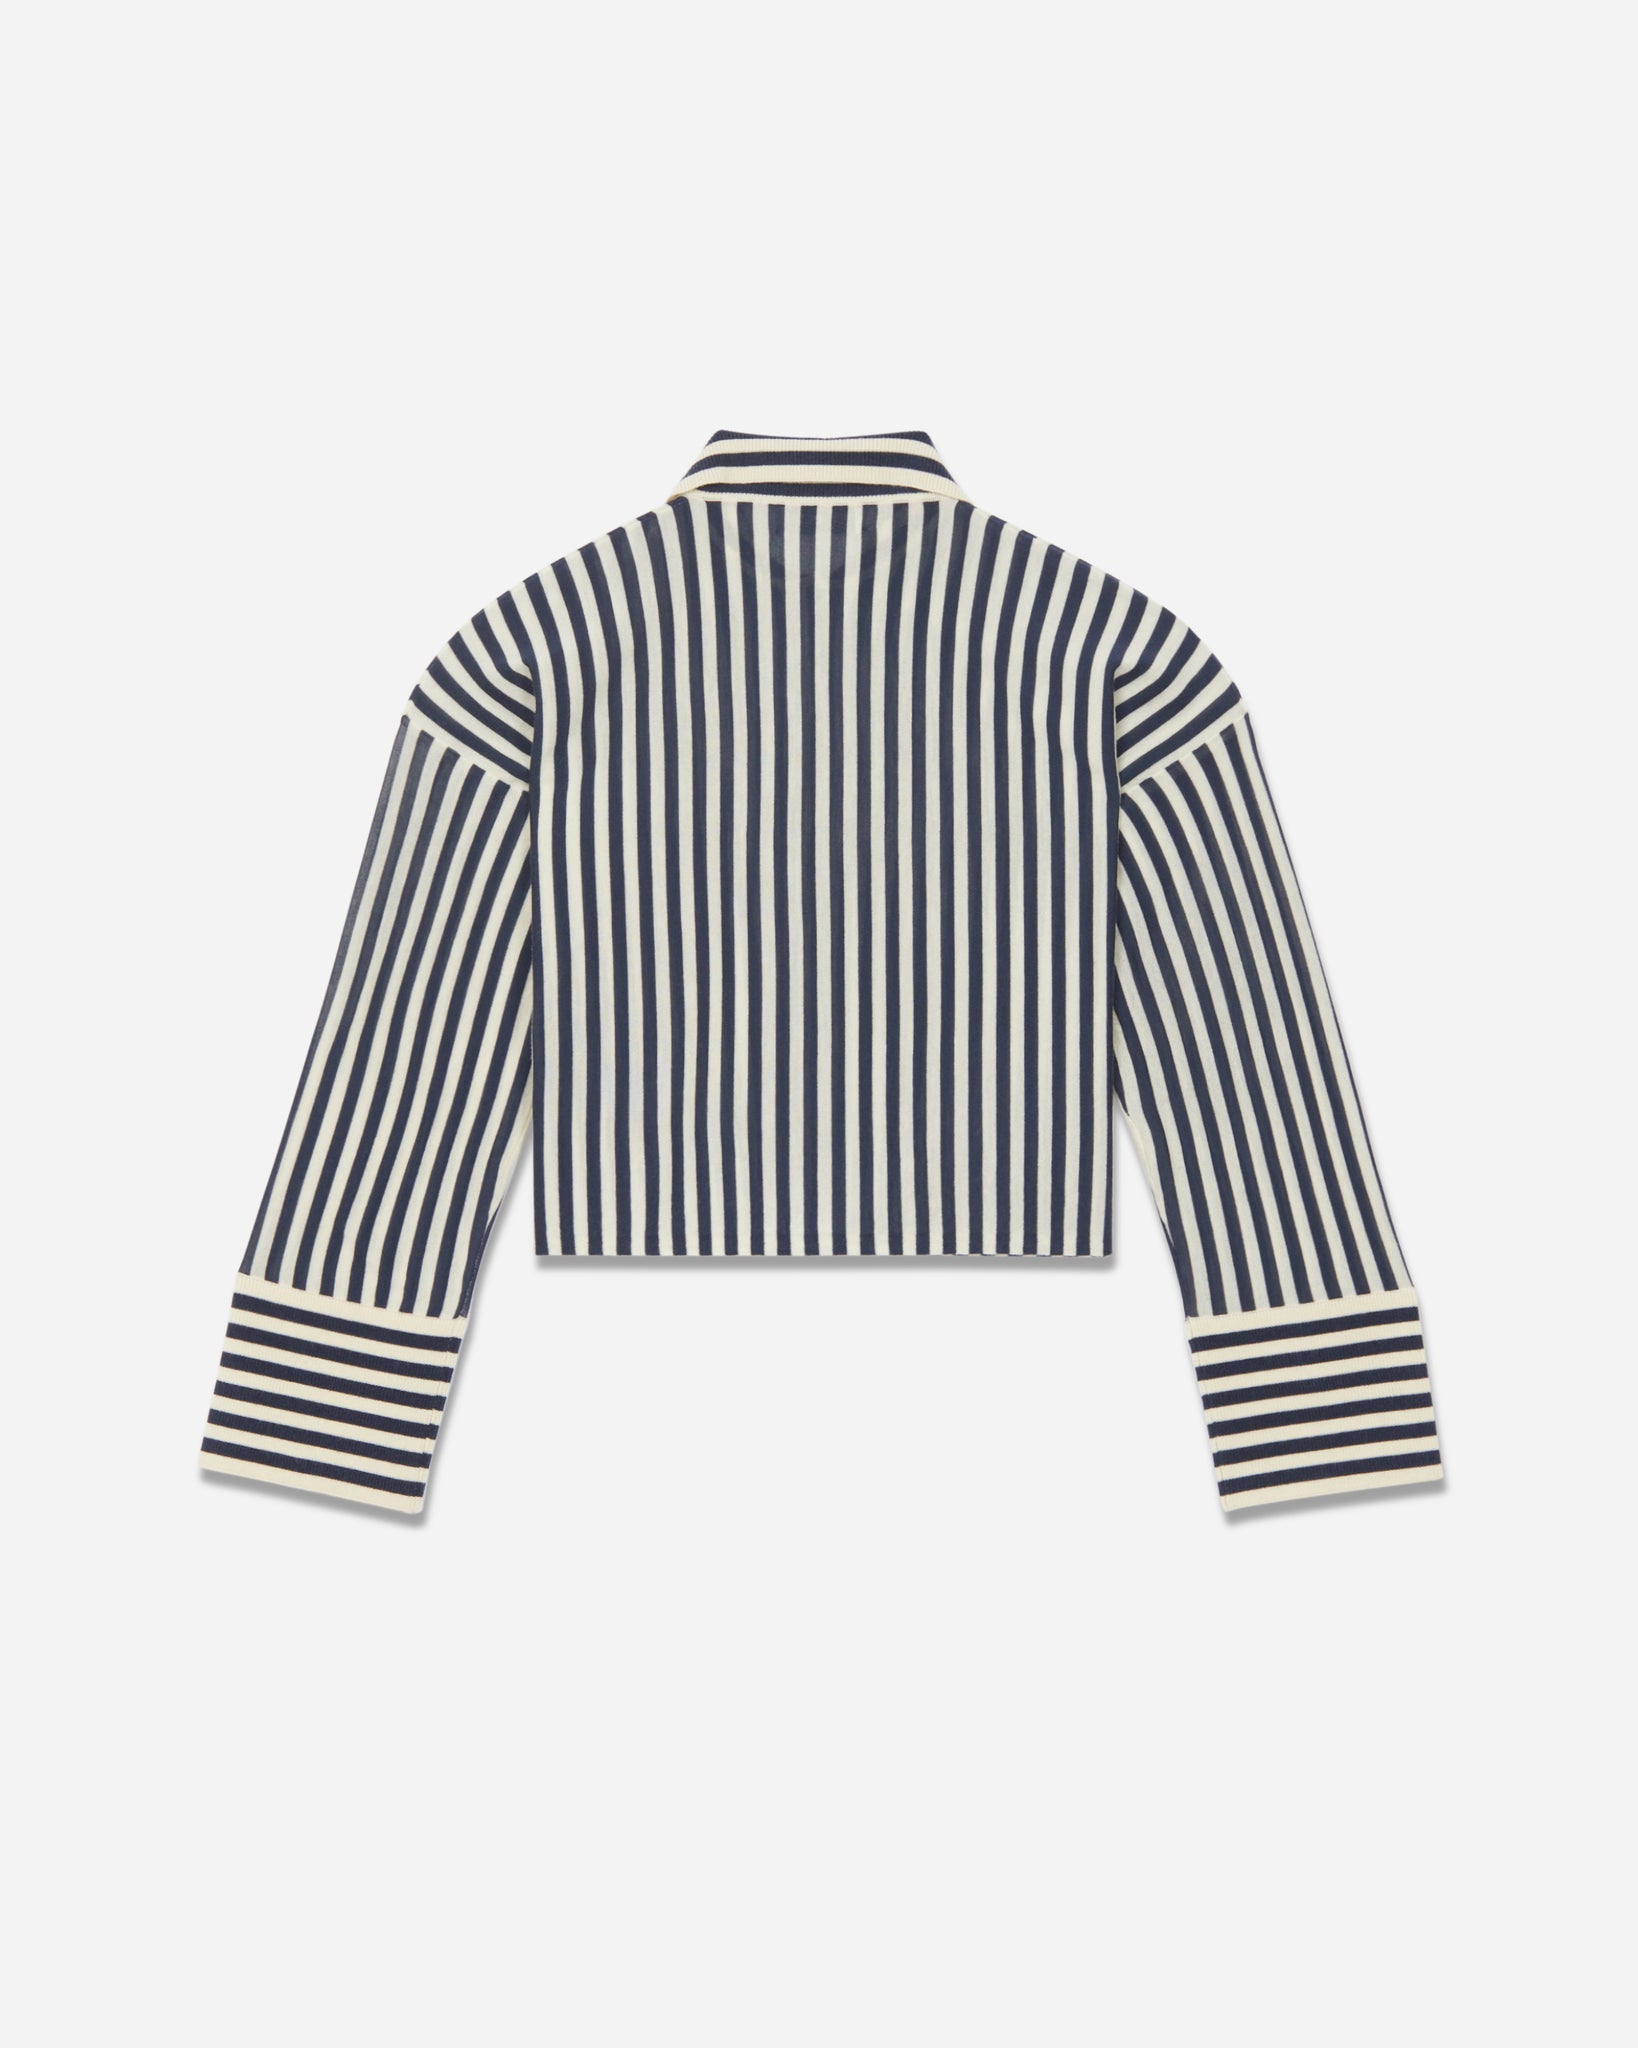 HATHAWAY SOFT-WRAP-SHIRT IN PAST-MIDNIGHT STRIPES